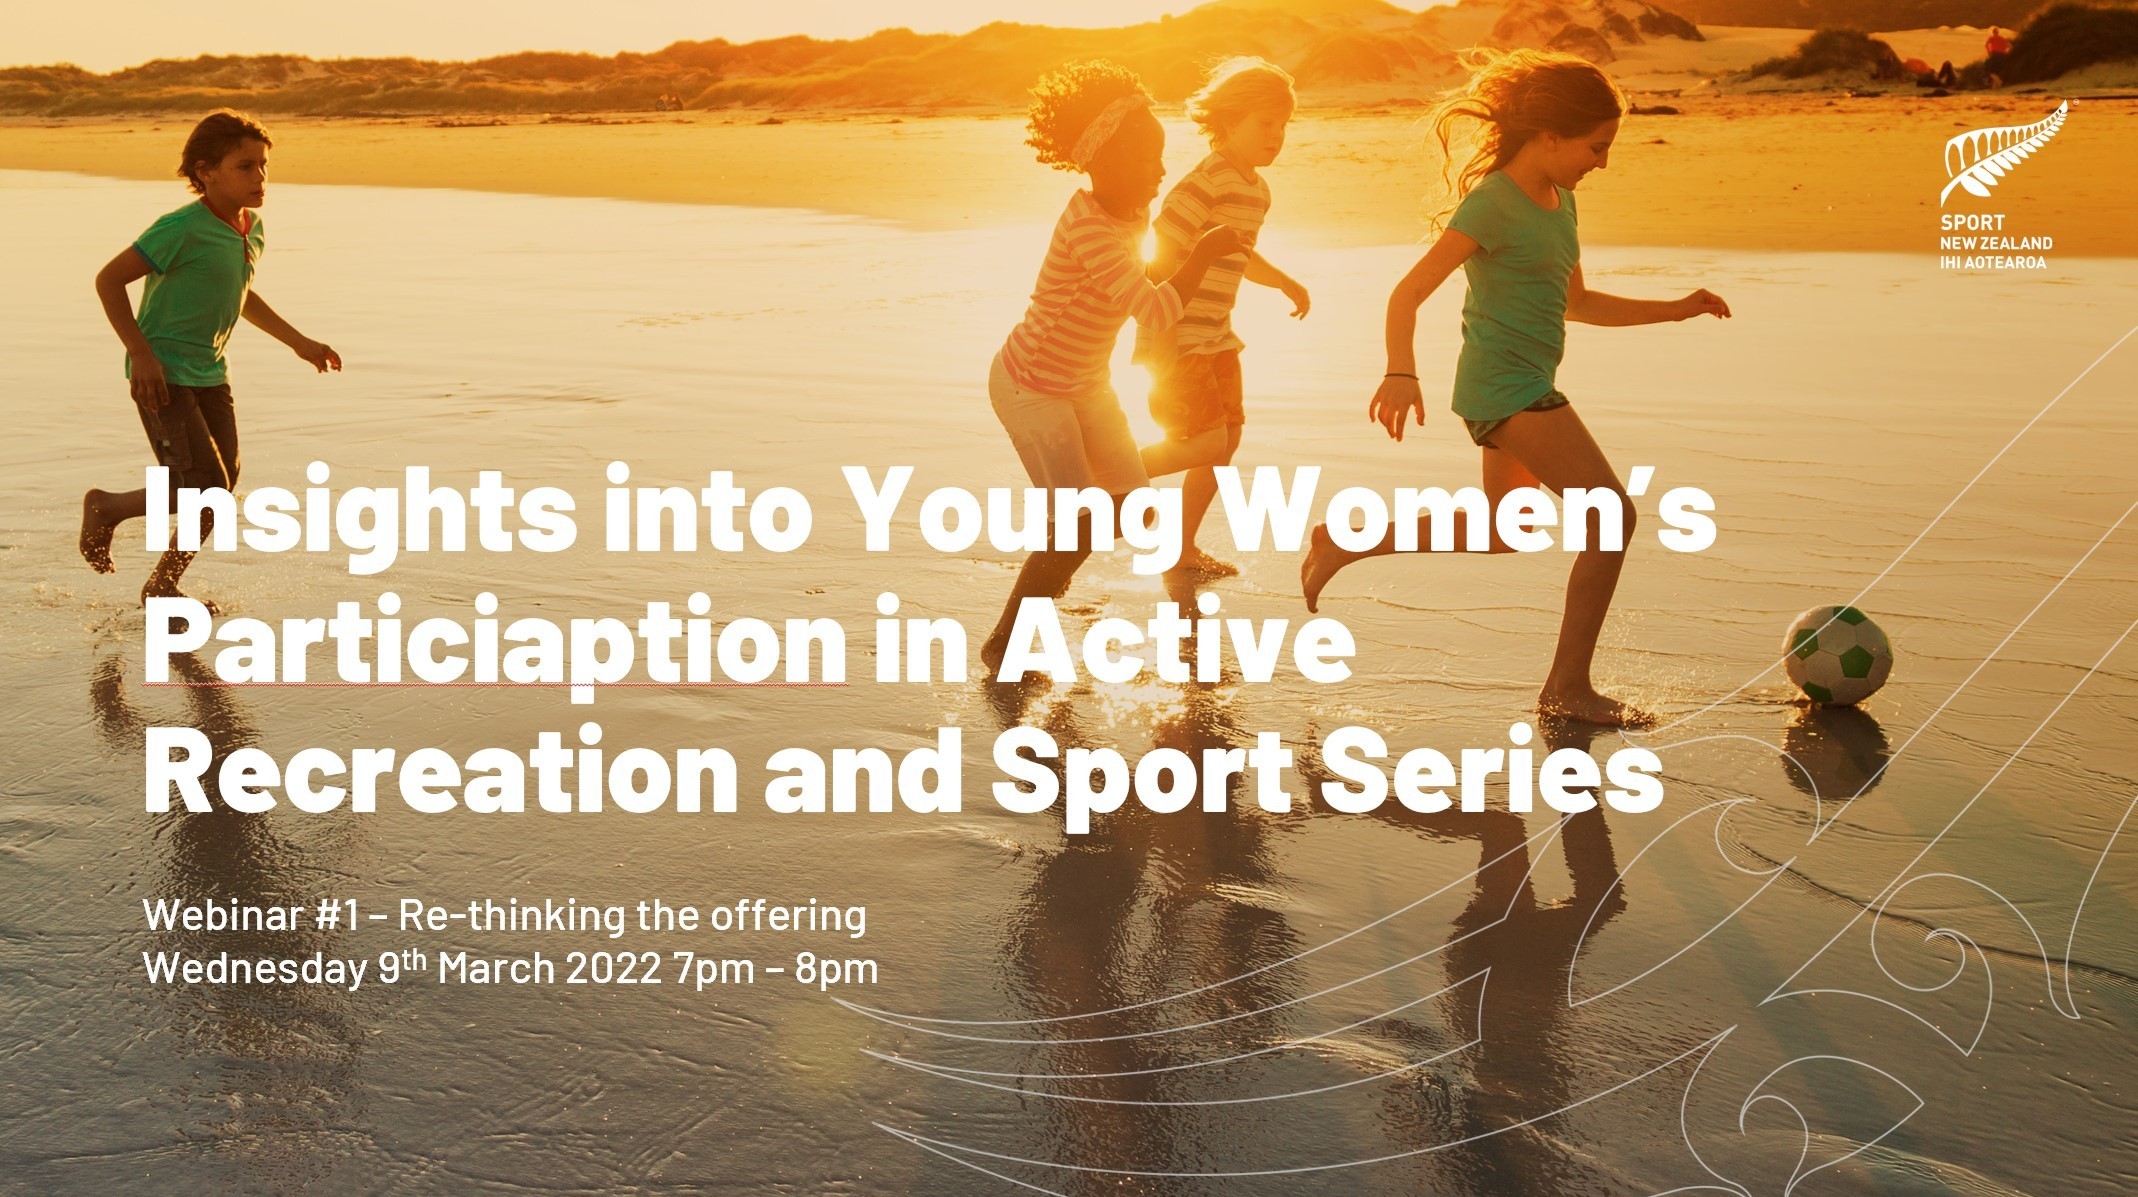 Insights to Young Women’s Participation - Webinar #1 "Rethinking the offering"